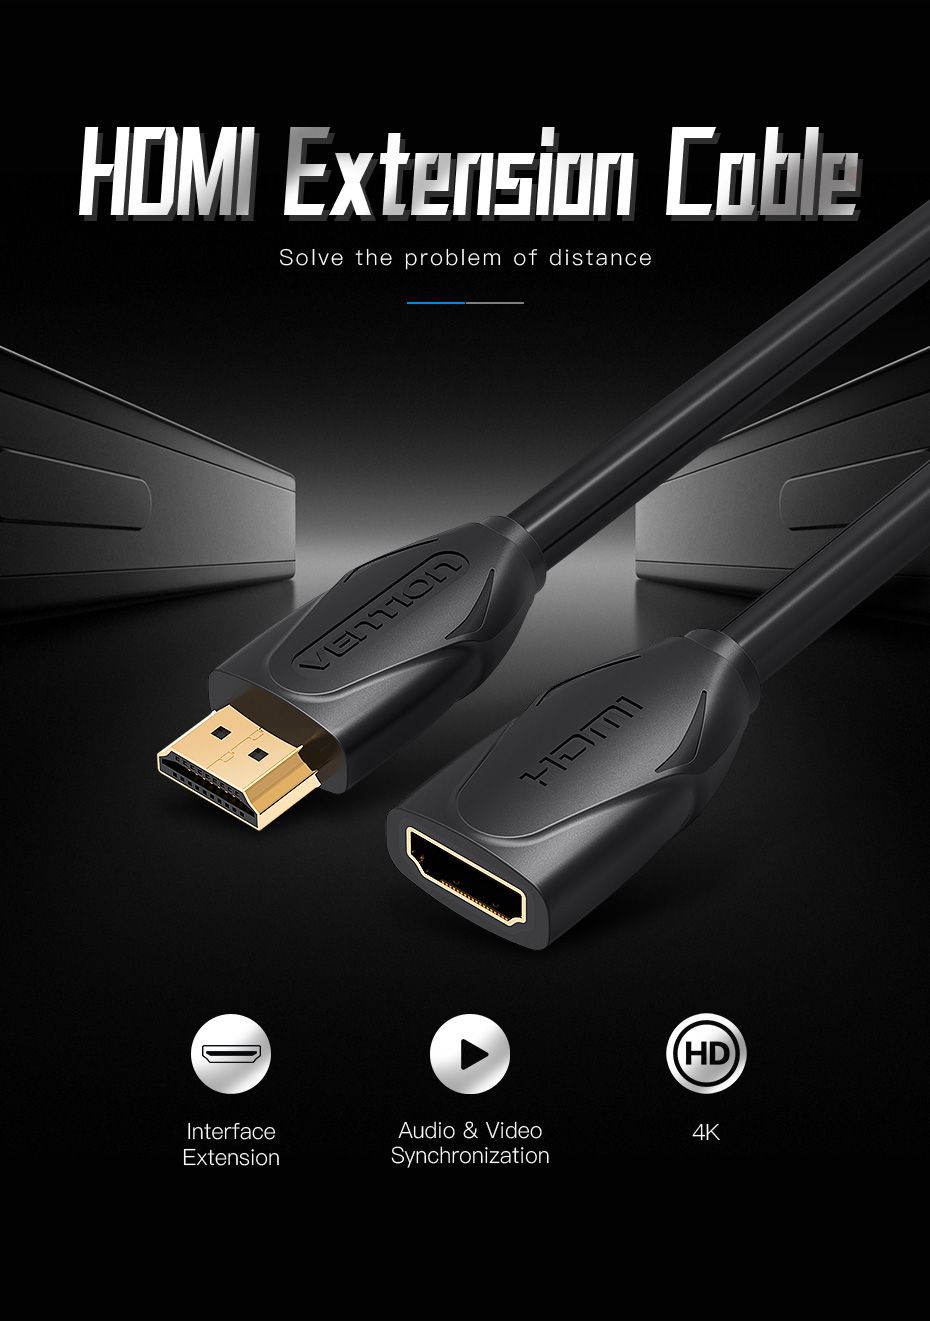 Vention-HDMI-Extender-Cable-HDMI-4K-20-Male-to-Female-HDMI-Extension-Cable-for-HDTV-Nintend-Switch-P-1641620